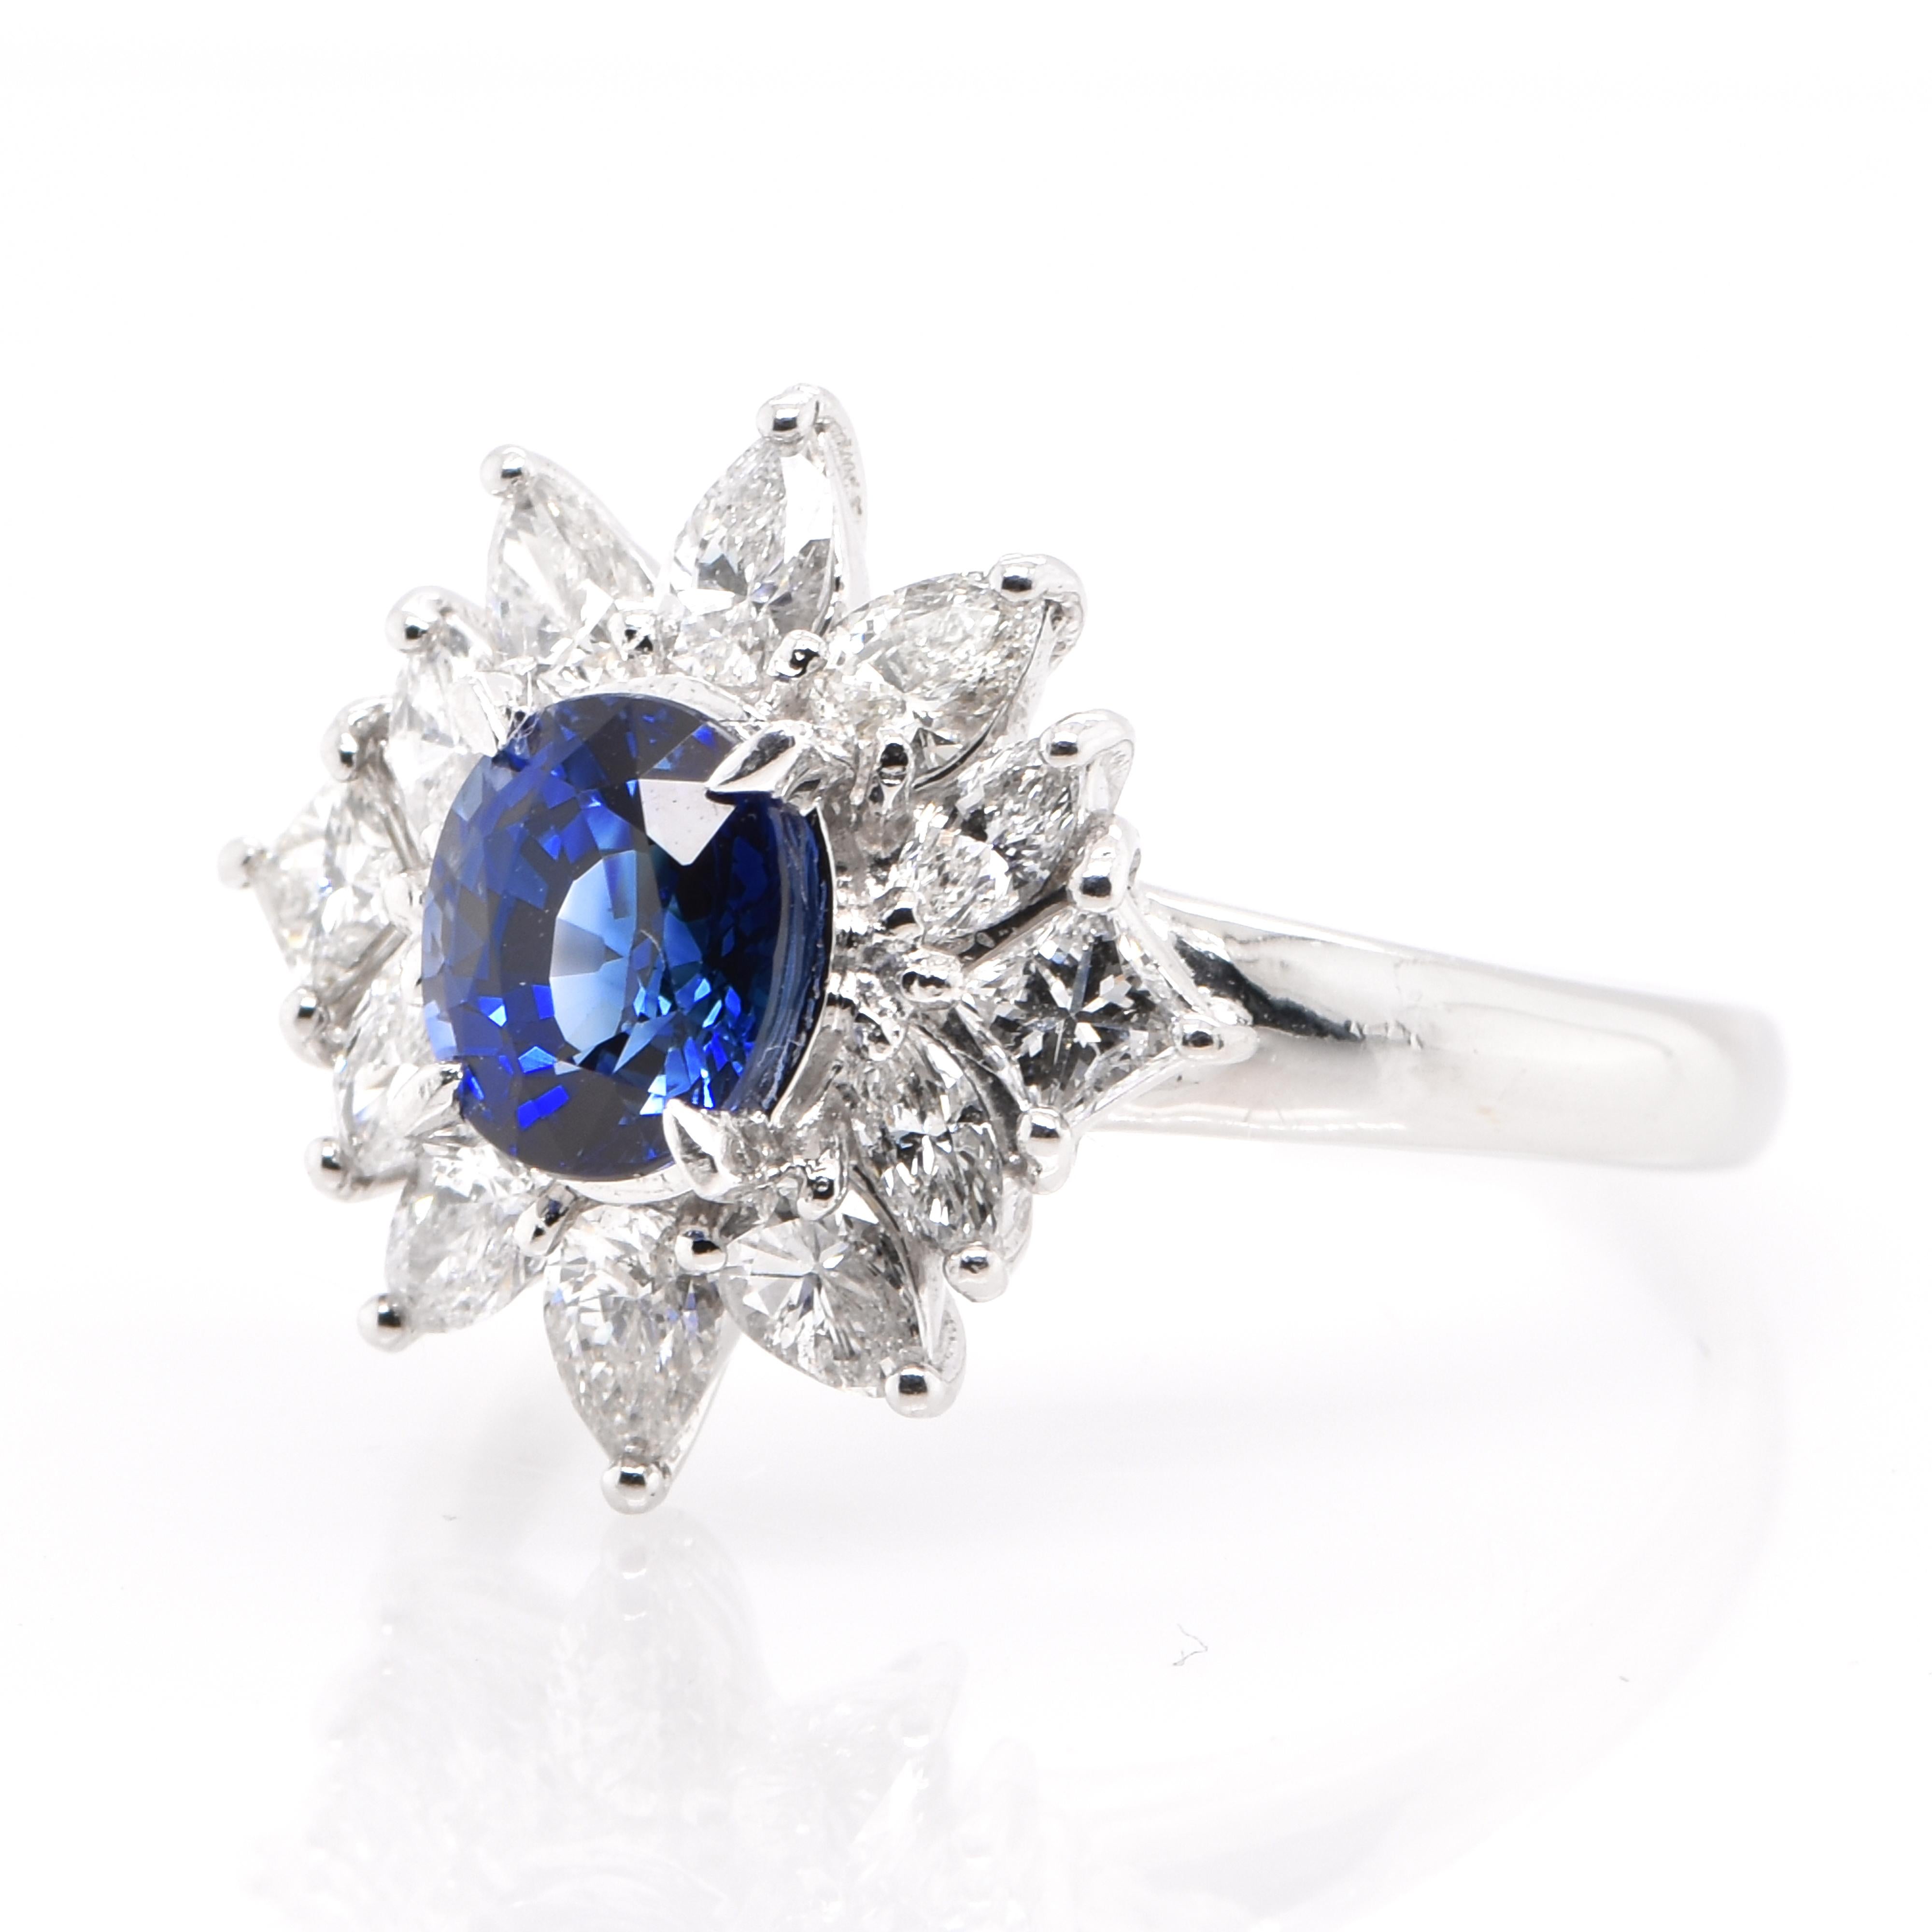 A beautiful Ring featuring a 1.11 Carat, Natural, Blue Sapphire and 0.89 Carats of Diamond Accents set in Platinum. Sapphires have extraordinary durability - they excel in hardness as well as toughness and durability making them very popular in